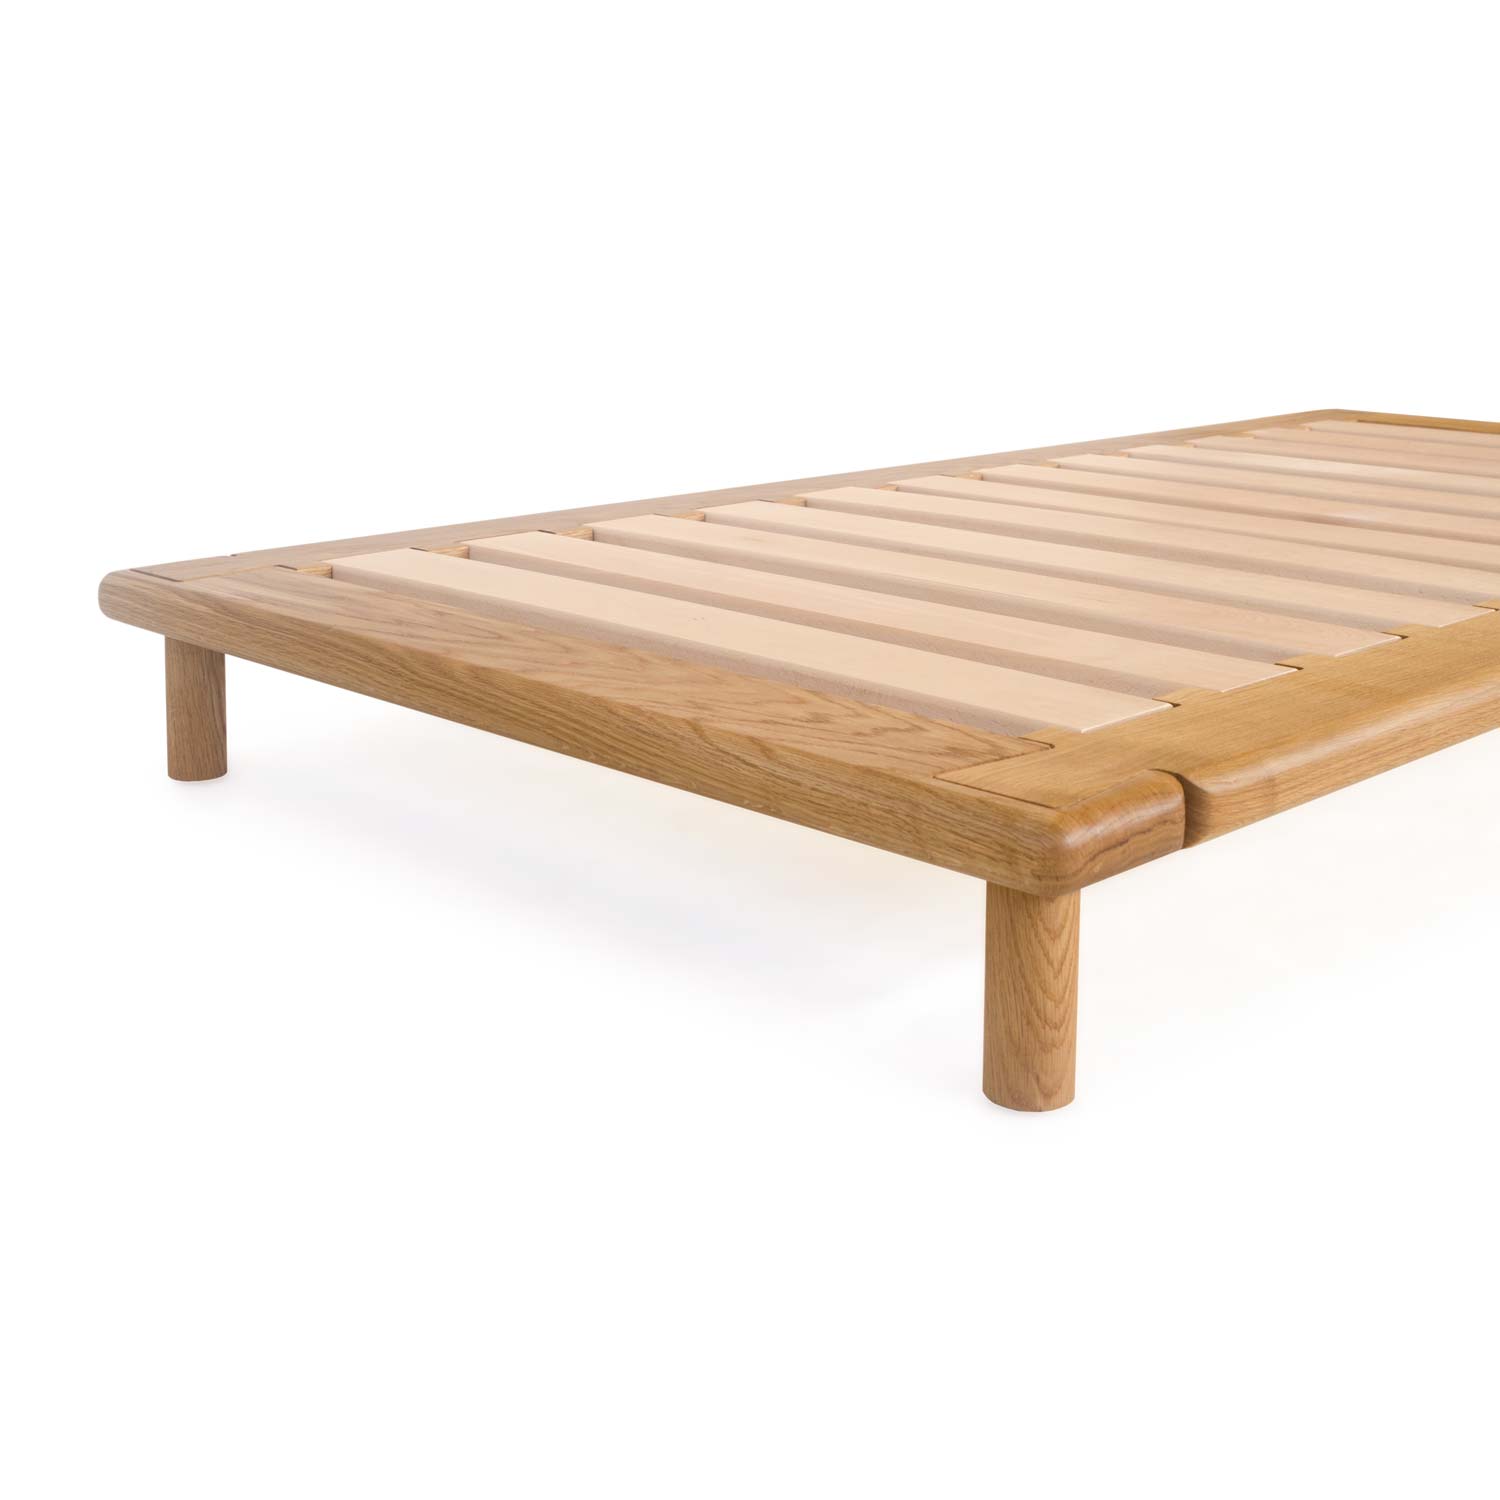 Oak Platform Bed Without A Headboard, What Is A Bed Without Headboard Called